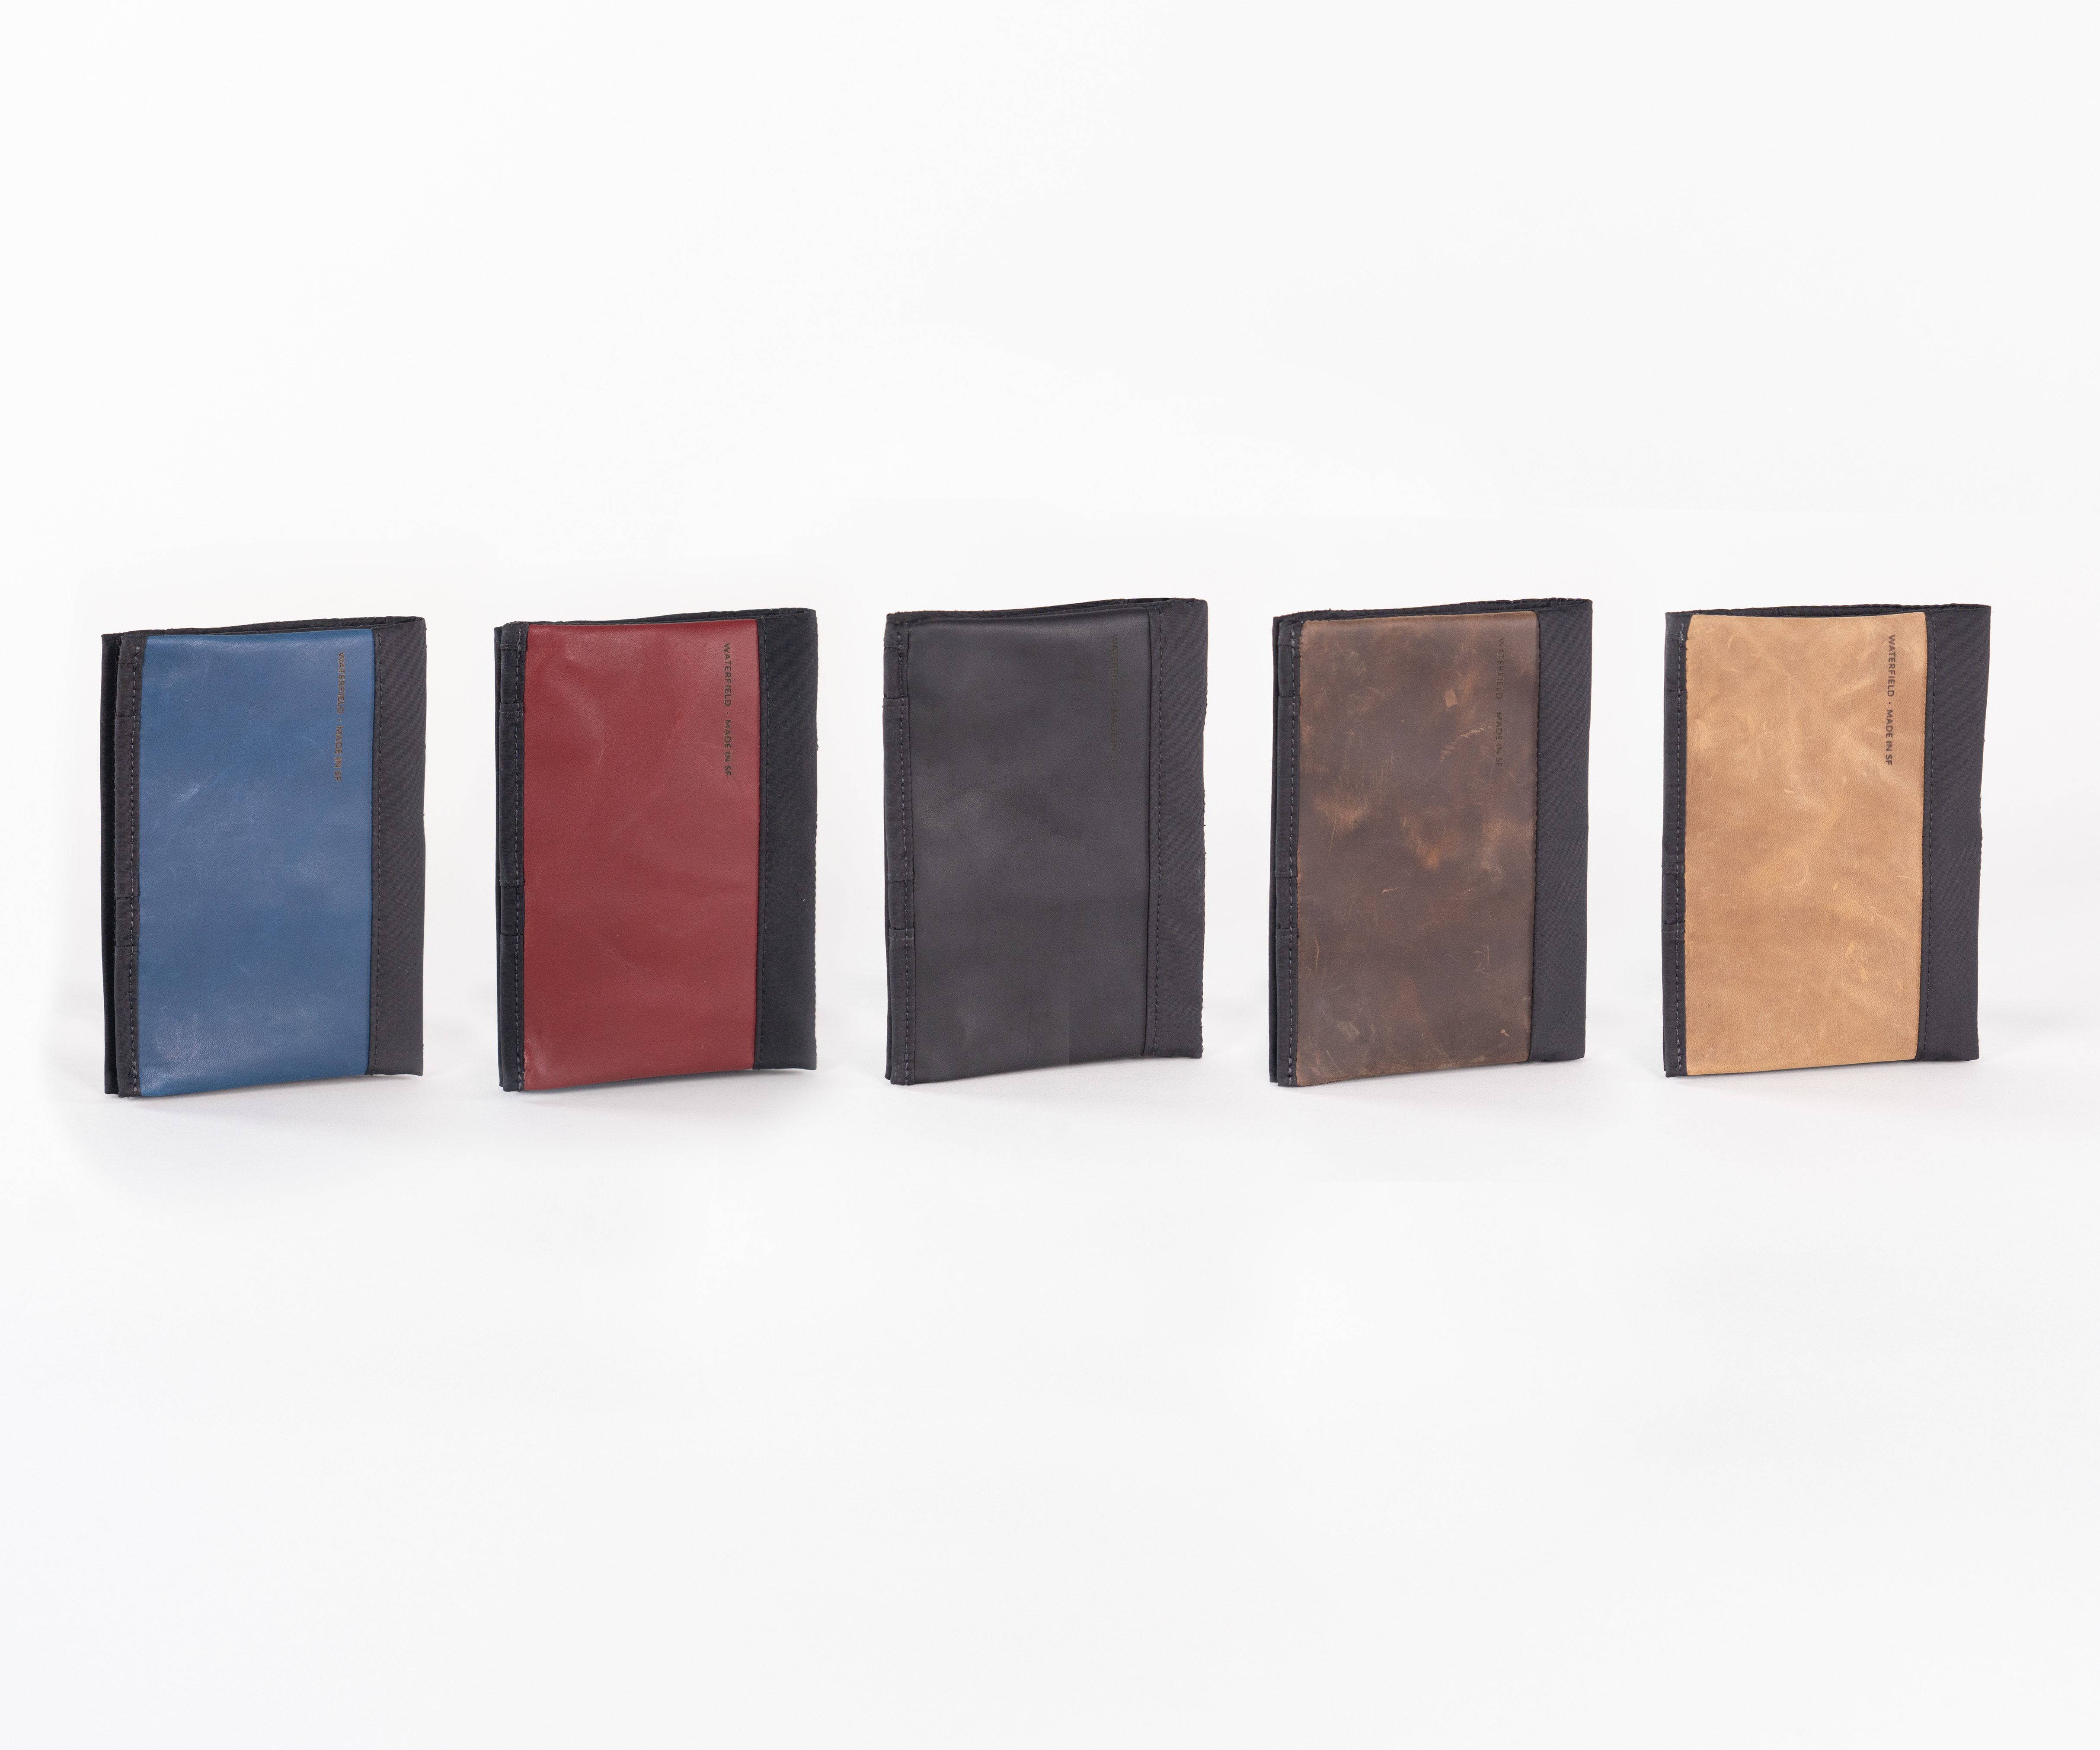 Five full-grain leather panel colors to choose from